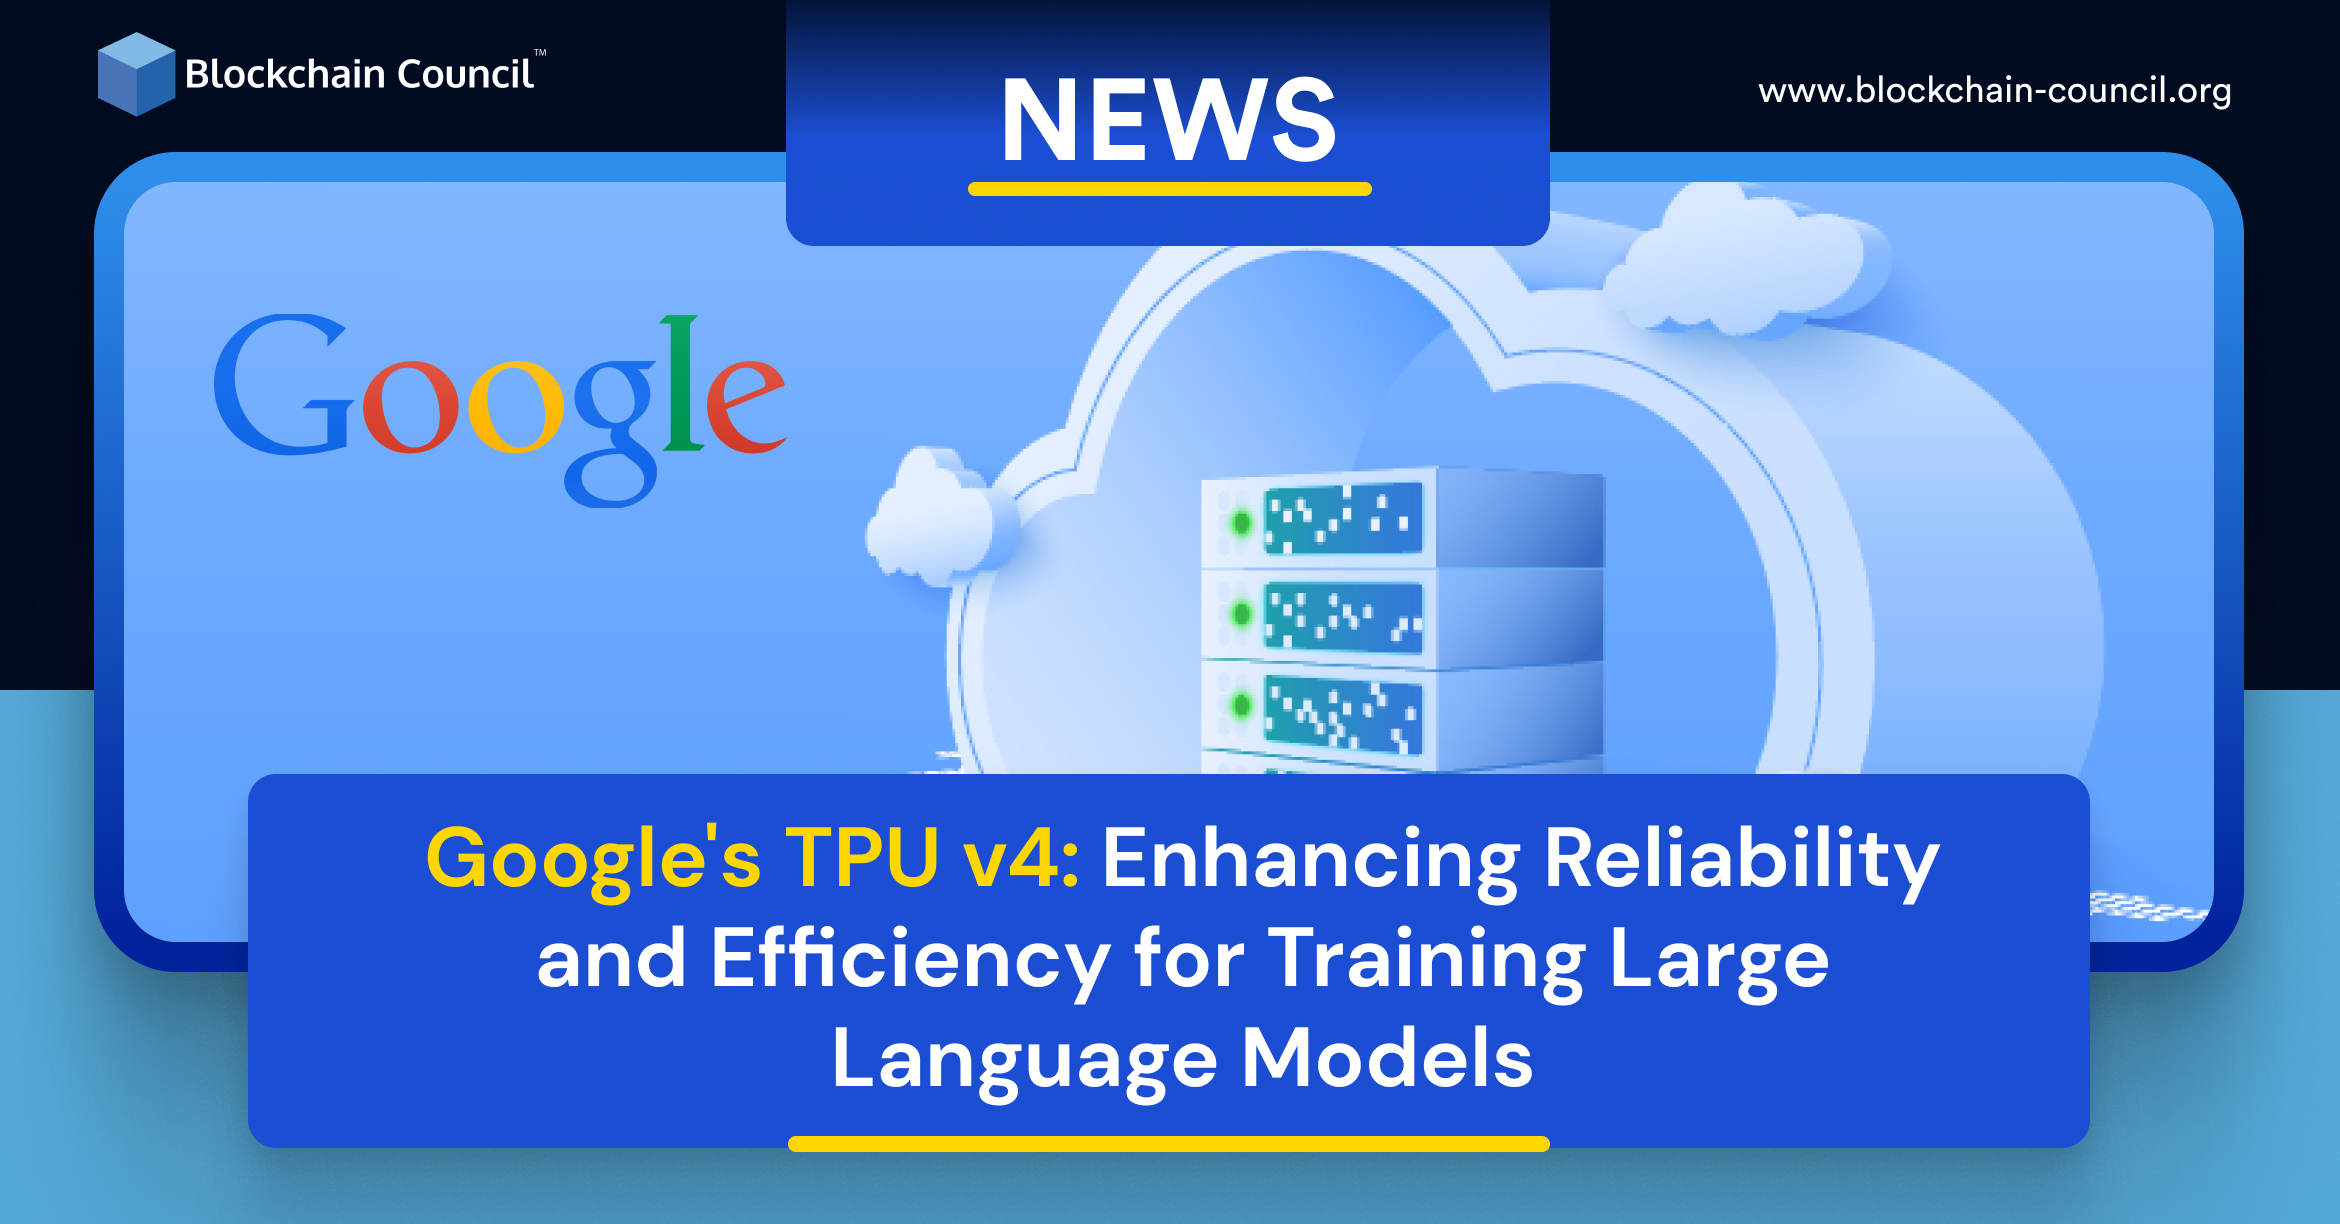 Google’s TPU v4: Enhancing Reliability and Efficiency for Training Large Language Models